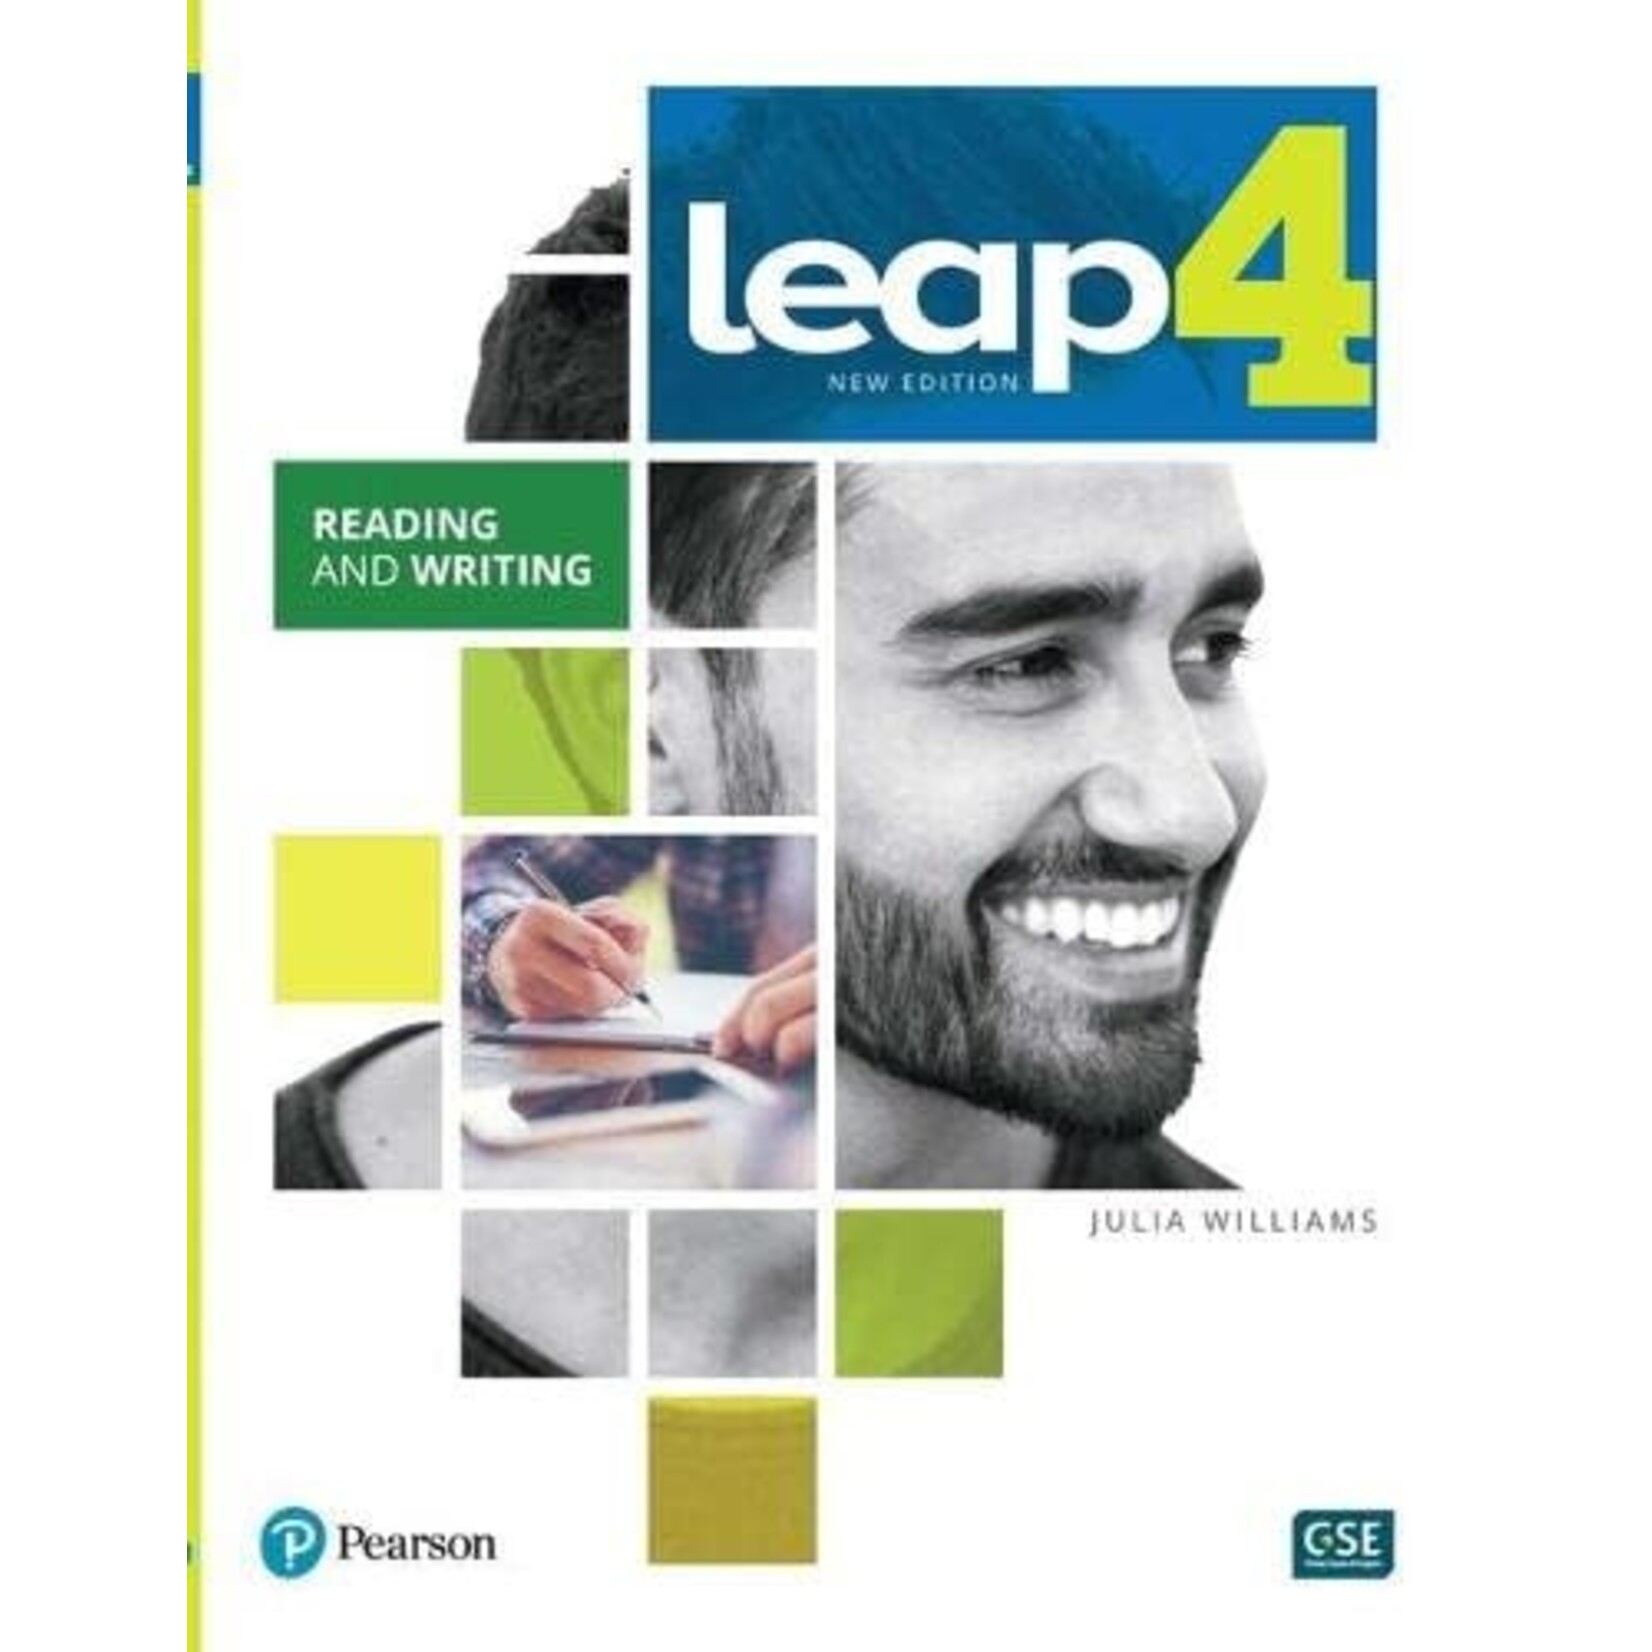 LEAP 4 Reading and Writing with My eLab & eText